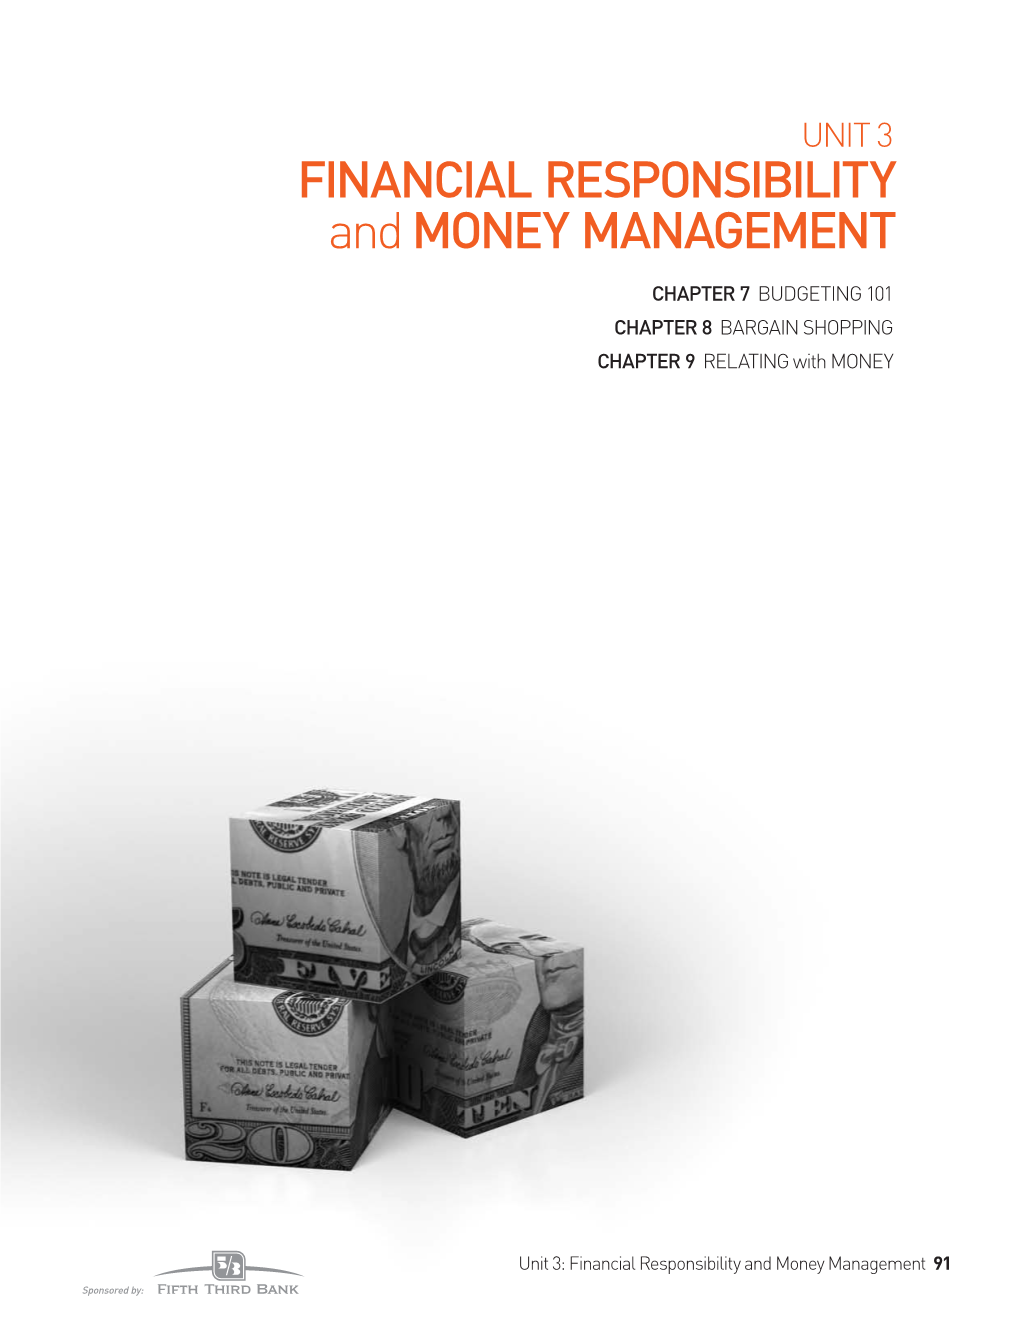 FINANCIAL RESPONSIBILITY and MONEY MANAGEMENT